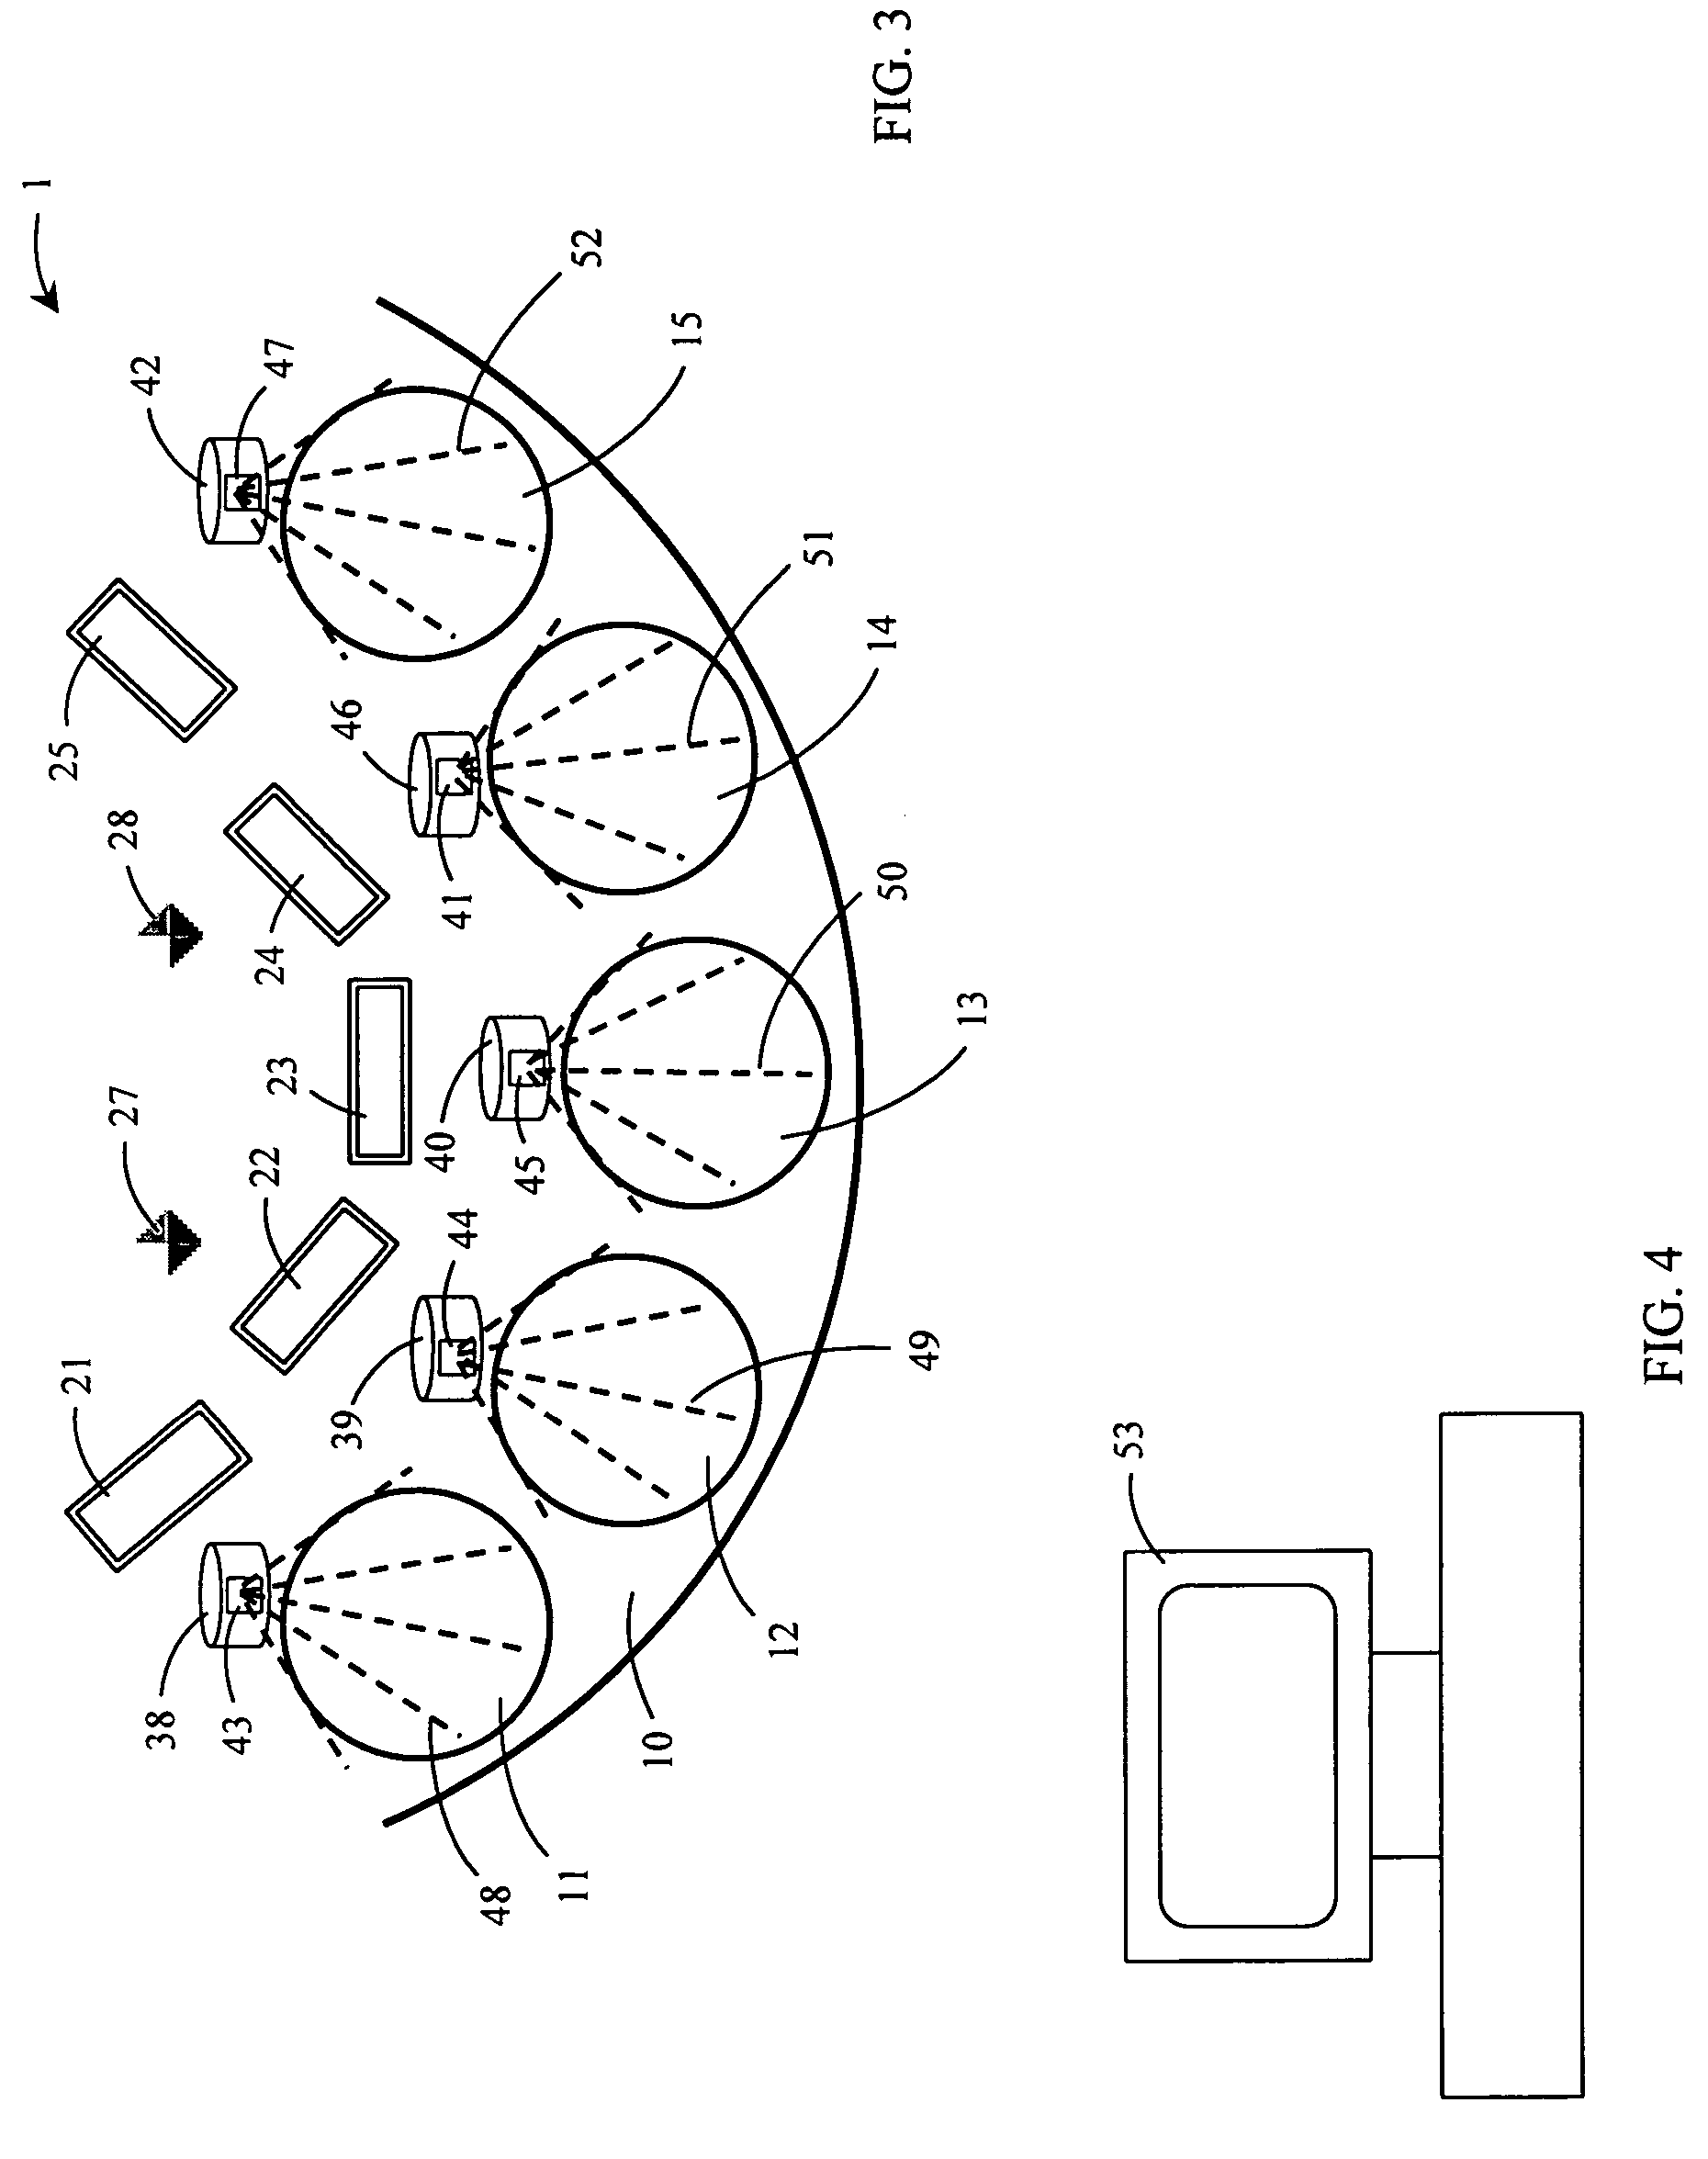 Method and apparatus for verifying players' bets on a gaming table